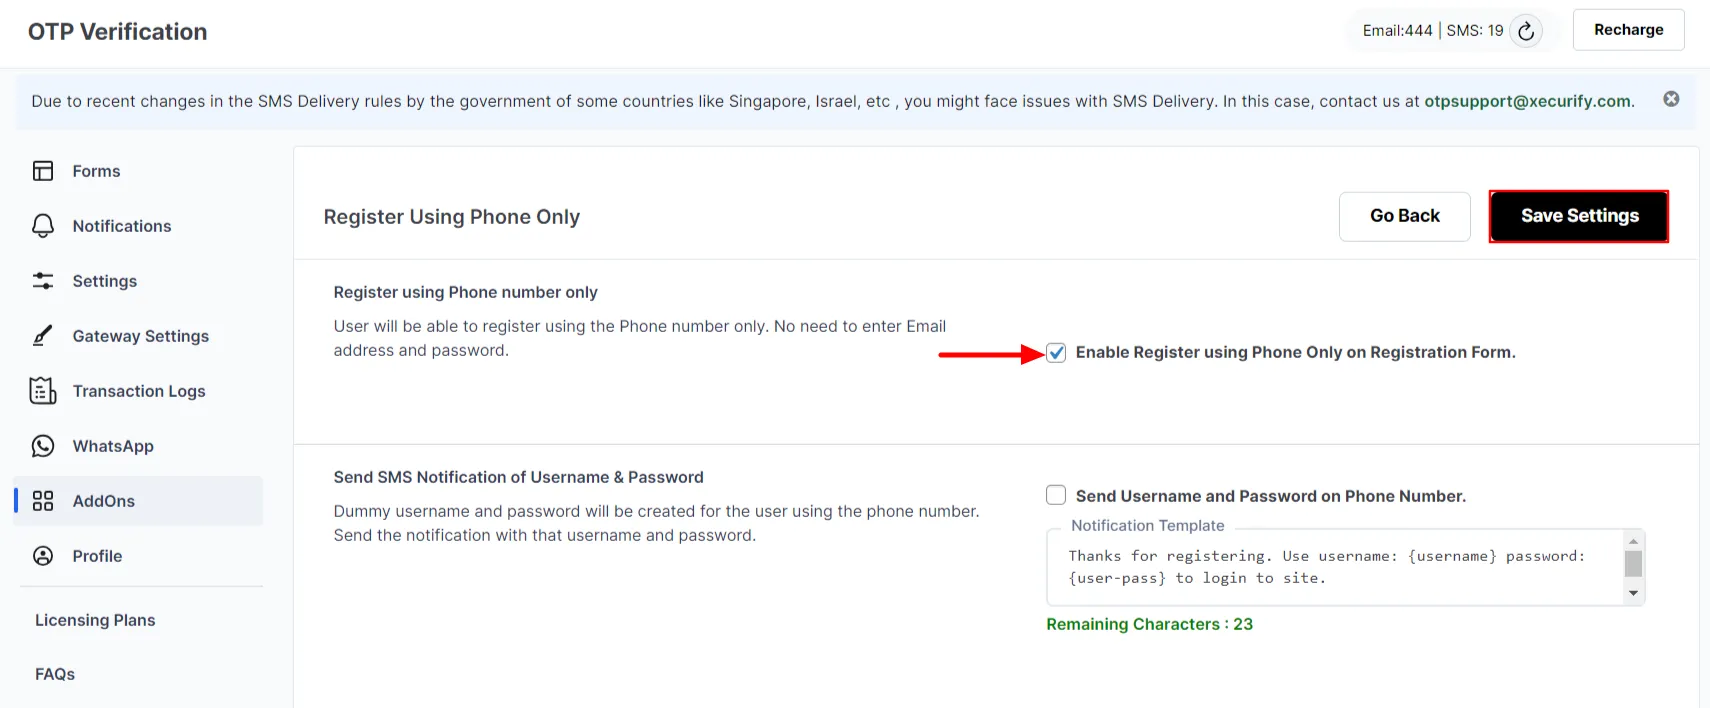 Register Using Phone number - Click save settings button